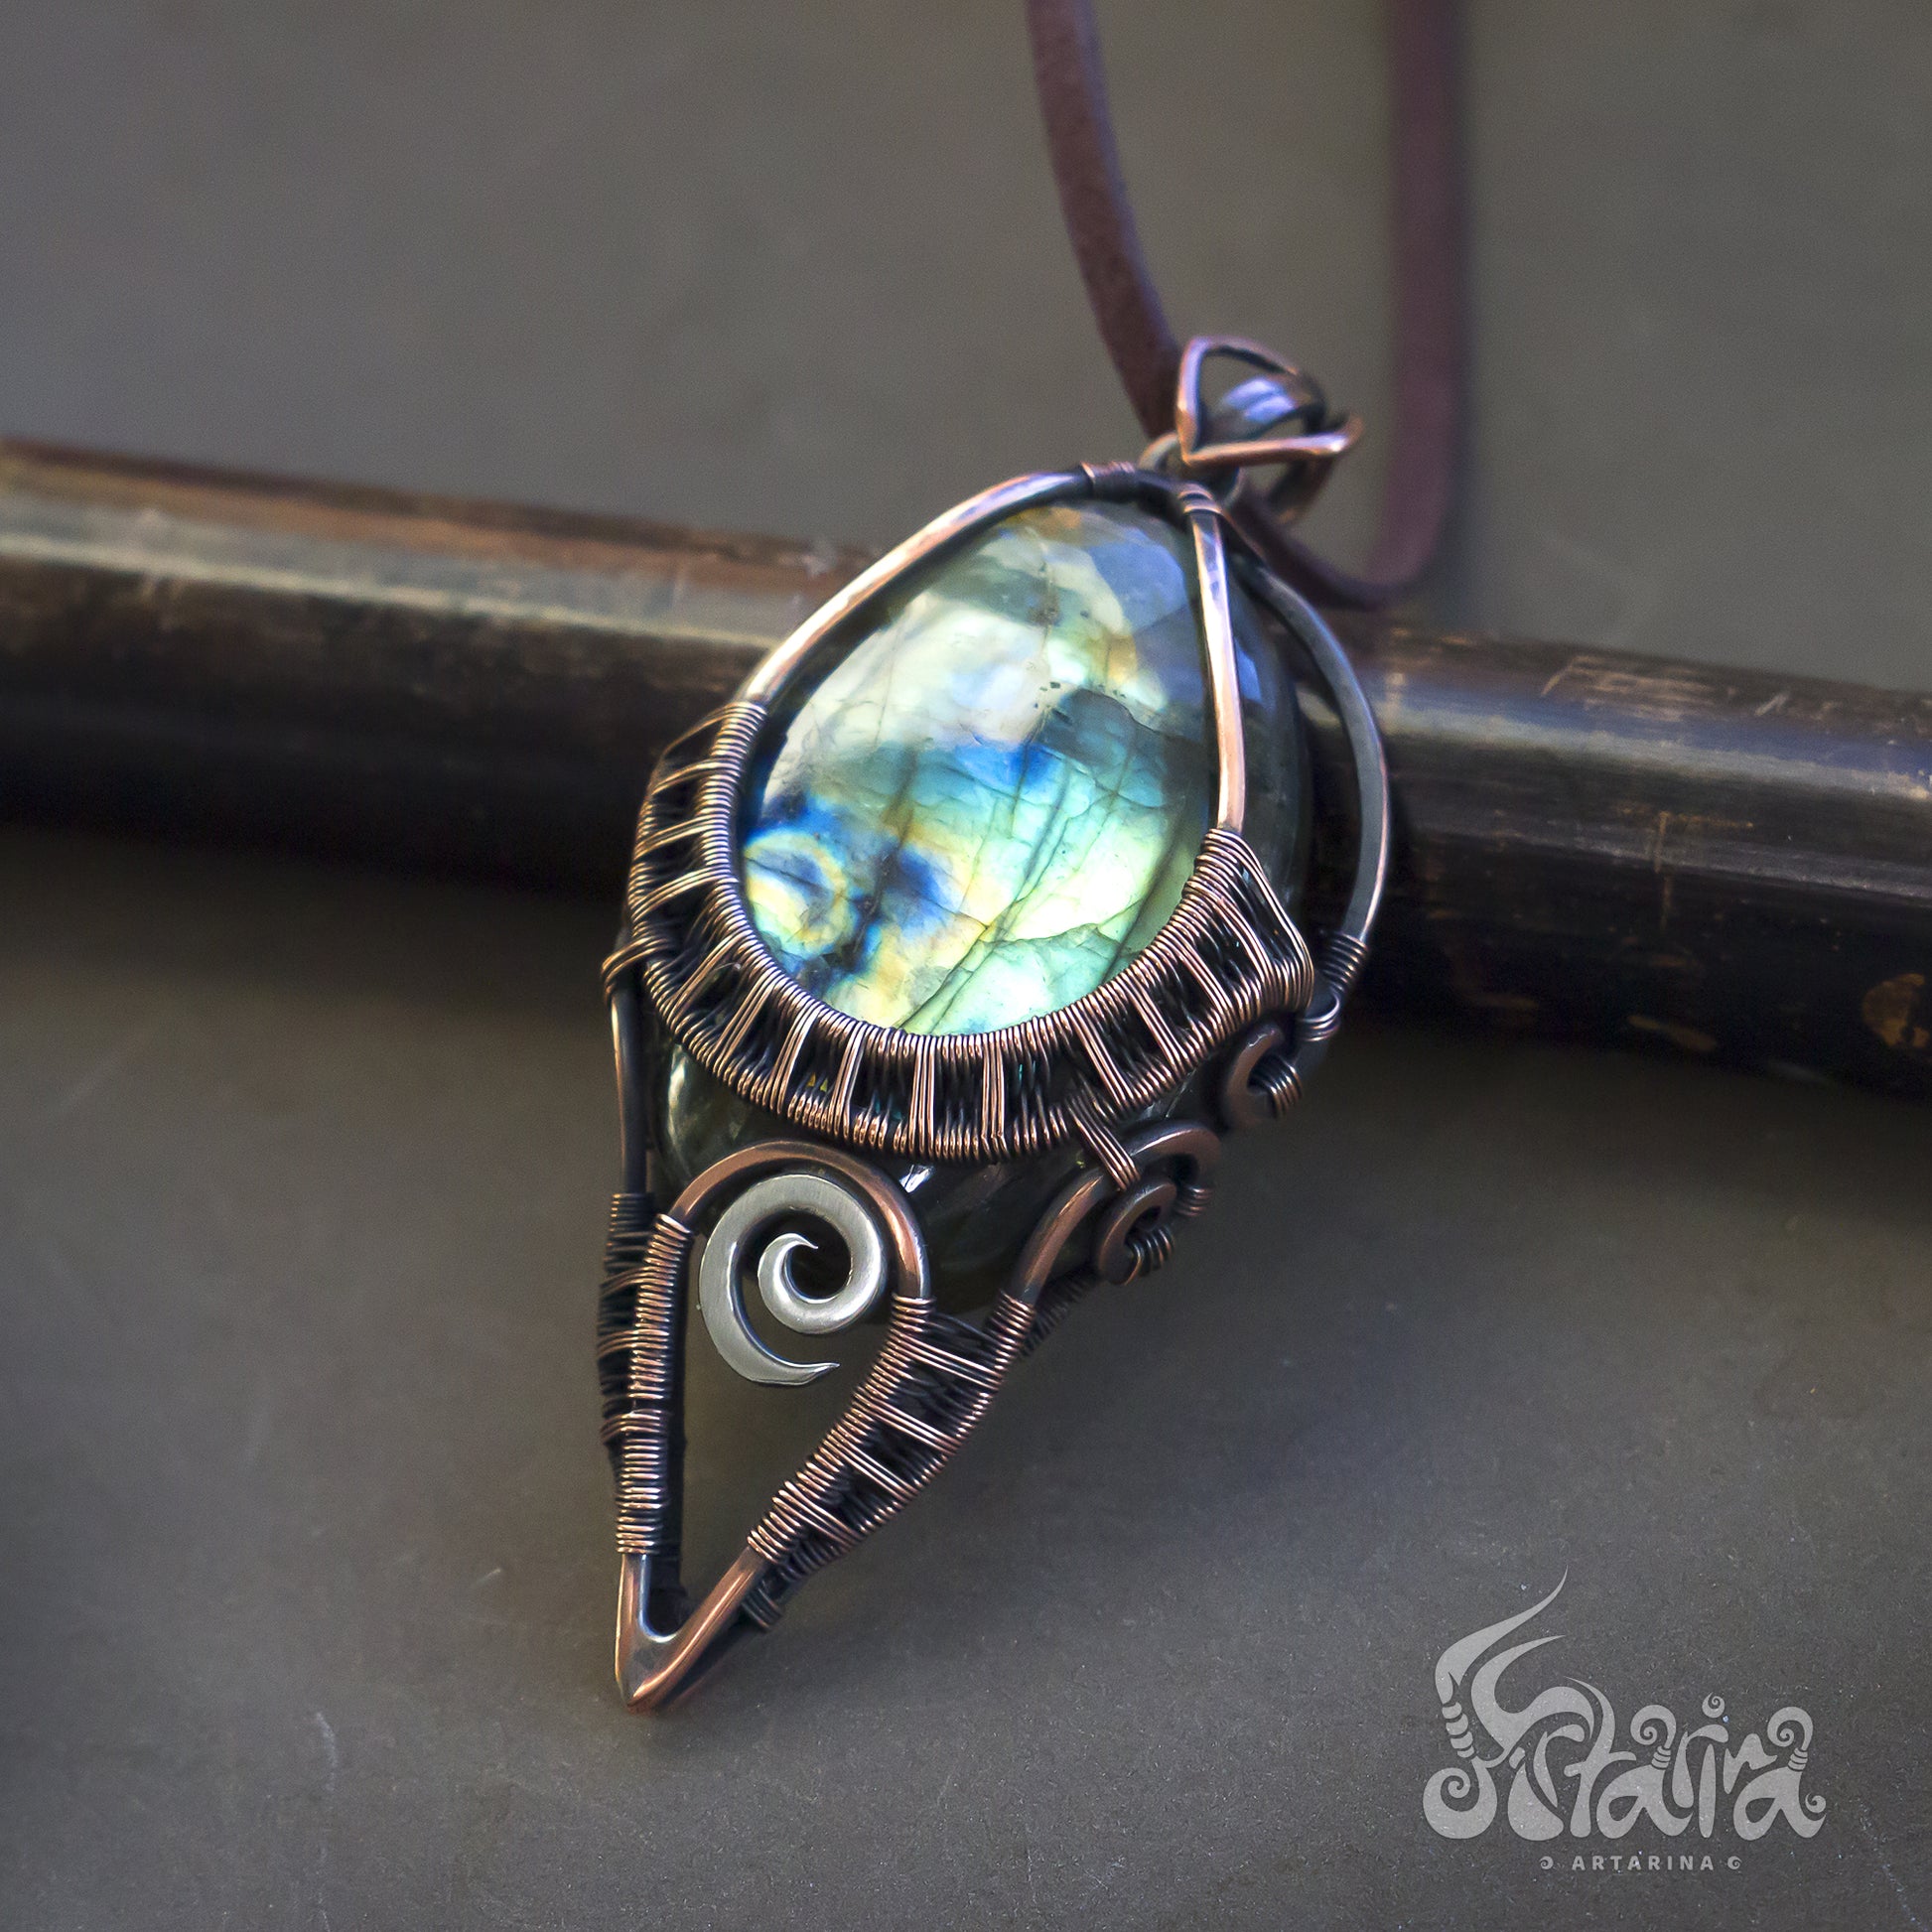 Wire wrapped jewelry for men. Intricate filigree hand weaved pendant with blue and green stone. Dark brown patina freeform necklace 